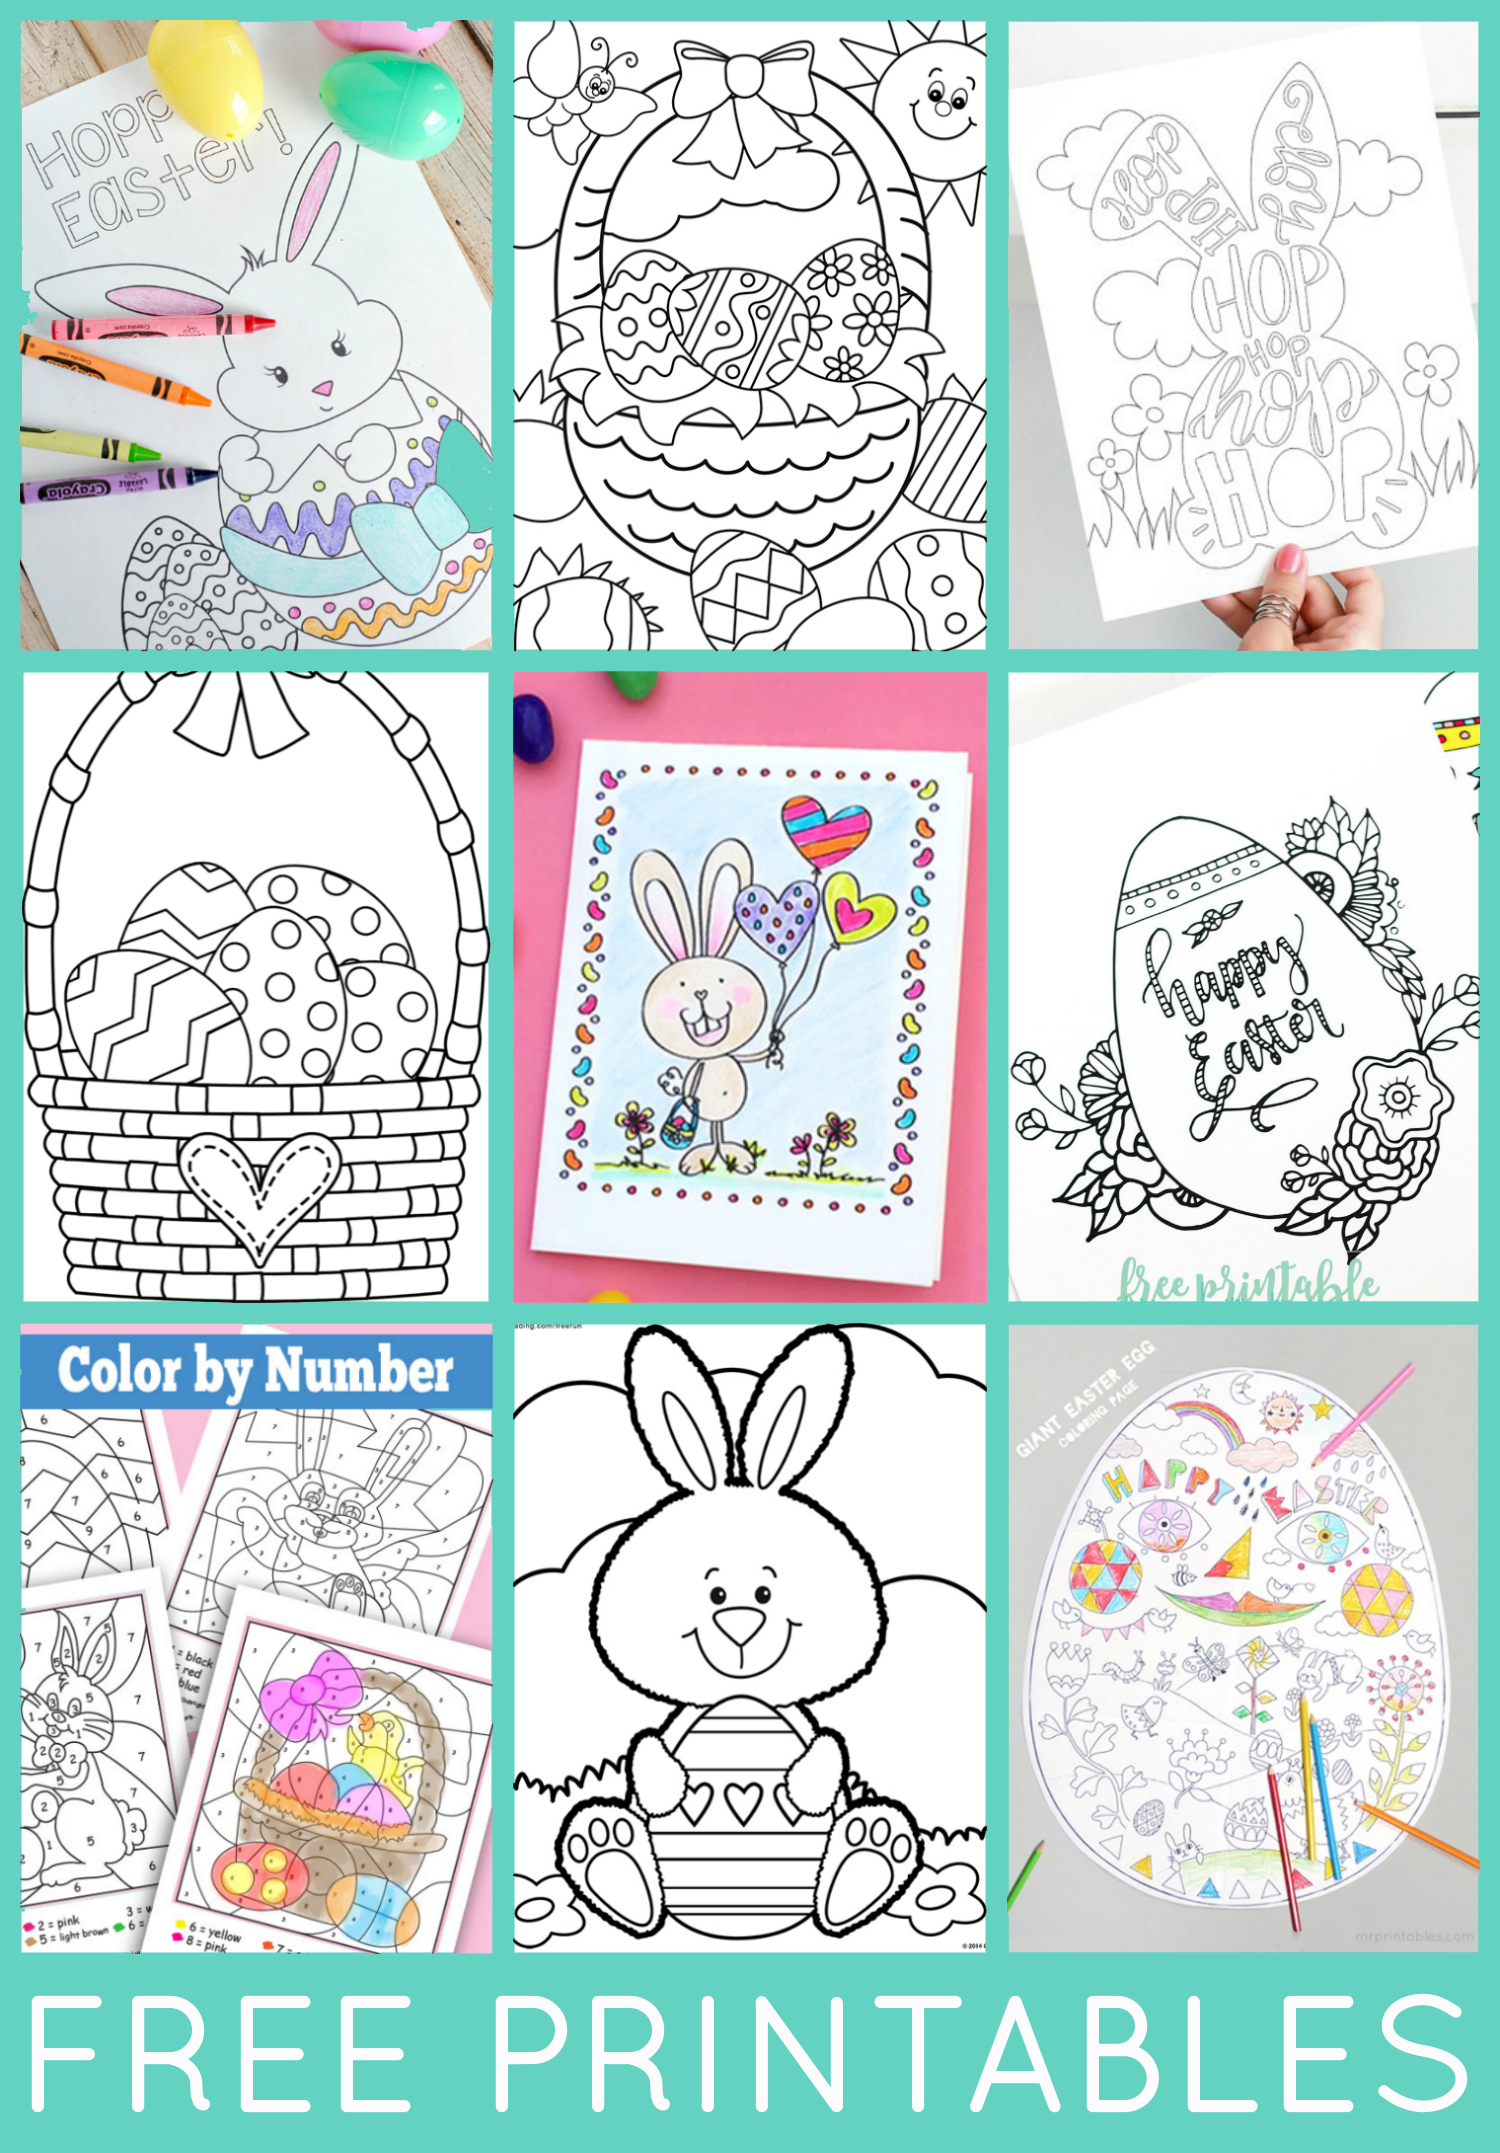 Free Printable Easter Coloring Pages are fun for kids of all ages Easter egg coloring